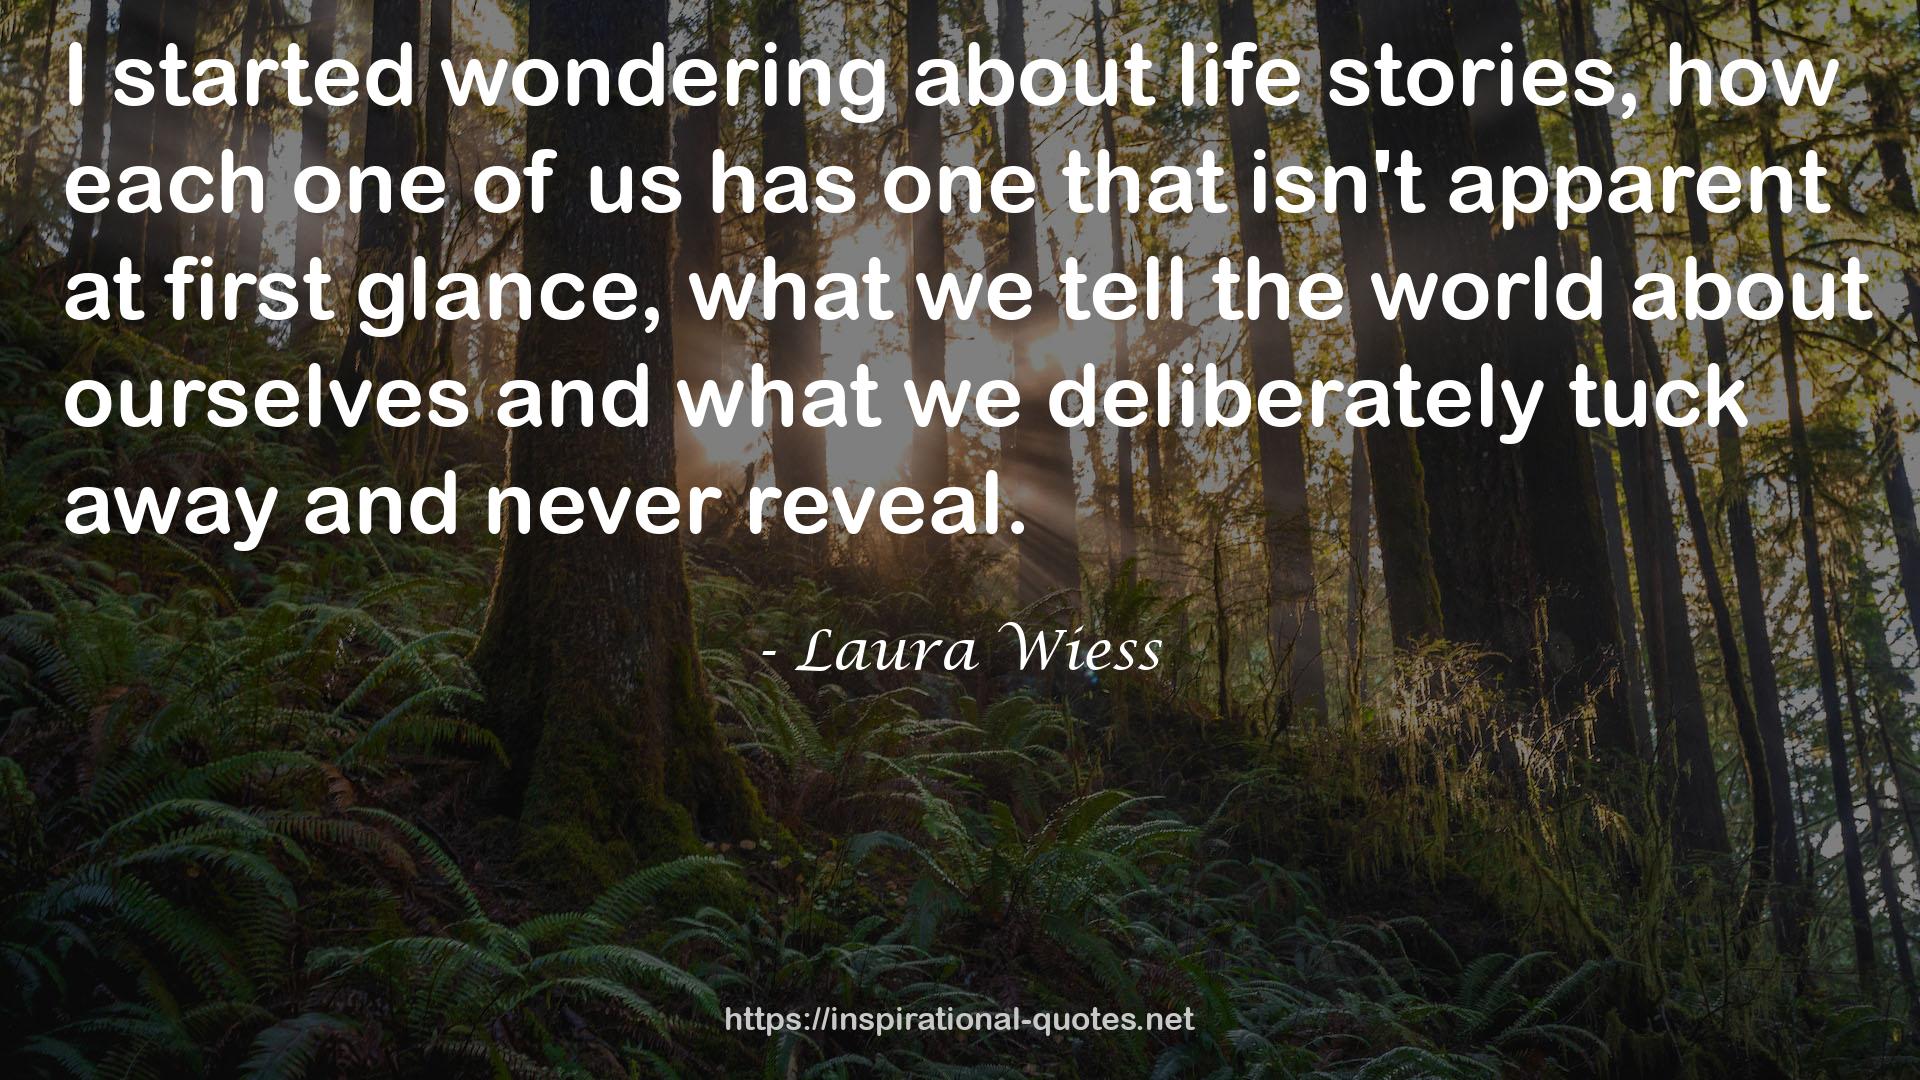 Laura Wiess QUOTES